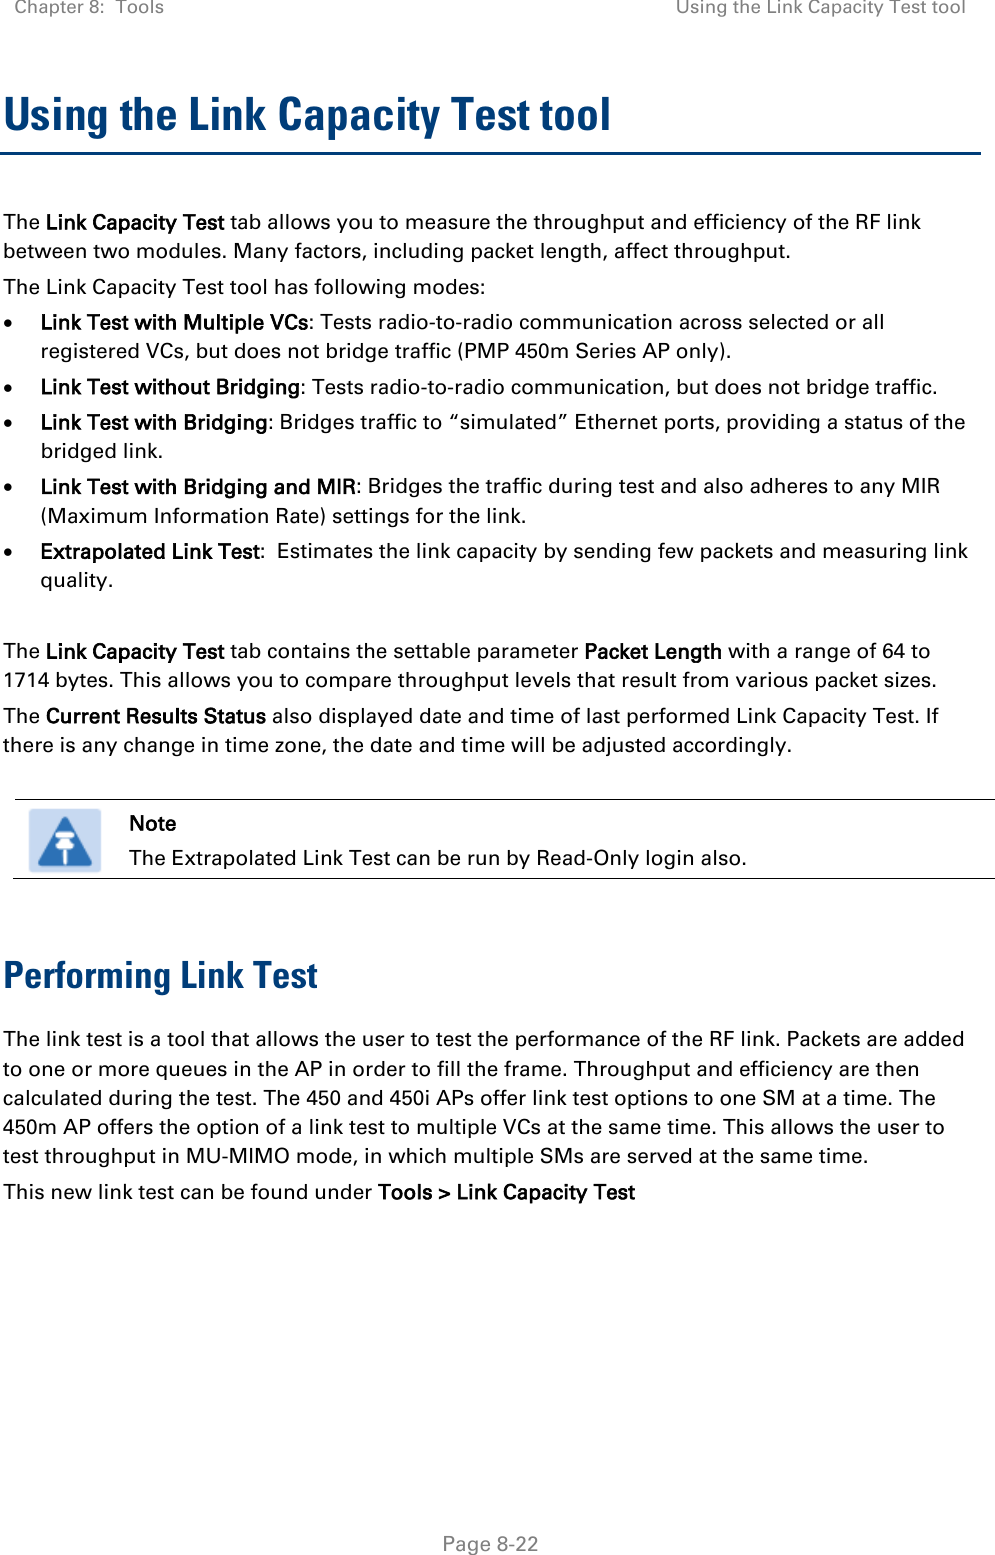 Chapter 8:  Tools Using the Link Capacity Test tool   Page 8-22 Using the Link Capacity Test tool The Link Capacity Test tab allows you to measure the throughput and efficiency of the RF link between two modules. Many factors, including packet length, affect throughput.  The Link Capacity Test tool has following modes: • Link Test with Multiple VCs: Tests radio-to-radio communication across selected or all registered VCs, but does not bridge traffic (PMP 450m Series AP only). • Link Test without Bridging: Tests radio-to-radio communication, but does not bridge traffic. • Link Test with Bridging: Bridges traffic to “simulated” Ethernet ports, providing a status of the bridged link. • Link Test with Bridging and MIR: Bridges the traffic during test and also adheres to any MIR (Maximum Information Rate) settings for the link. • Extrapolated Link Test:  Estimates the link capacity by sending few packets and measuring link quality.  The Link Capacity Test tab contains the settable parameter Packet Length with a range of 64 to 1714 bytes. This allows you to compare throughput levels that result from various packet sizes. The Current Results Status also displayed date and time of last performed Link Capacity Test. If there is any change in time zone, the date and time will be adjusted accordingly.   Note The Extrapolated Link Test can be run by Read-Only login also.  Performing Link Test The link test is a tool that allows the user to test the performance of the RF link. Packets are added to one or more queues in the AP in order to fill the frame. Throughput and efficiency are then calculated during the test. The 450 and 450i APs offer link test options to one SM at a time. The 450m AP offers the option of a link test to multiple VCs at the same time. This allows the user to test throughput in MU-MIMO mode, in which multiple SMs are served at the same time. This new link test can be found under Tools &gt; Link Capacity Test 